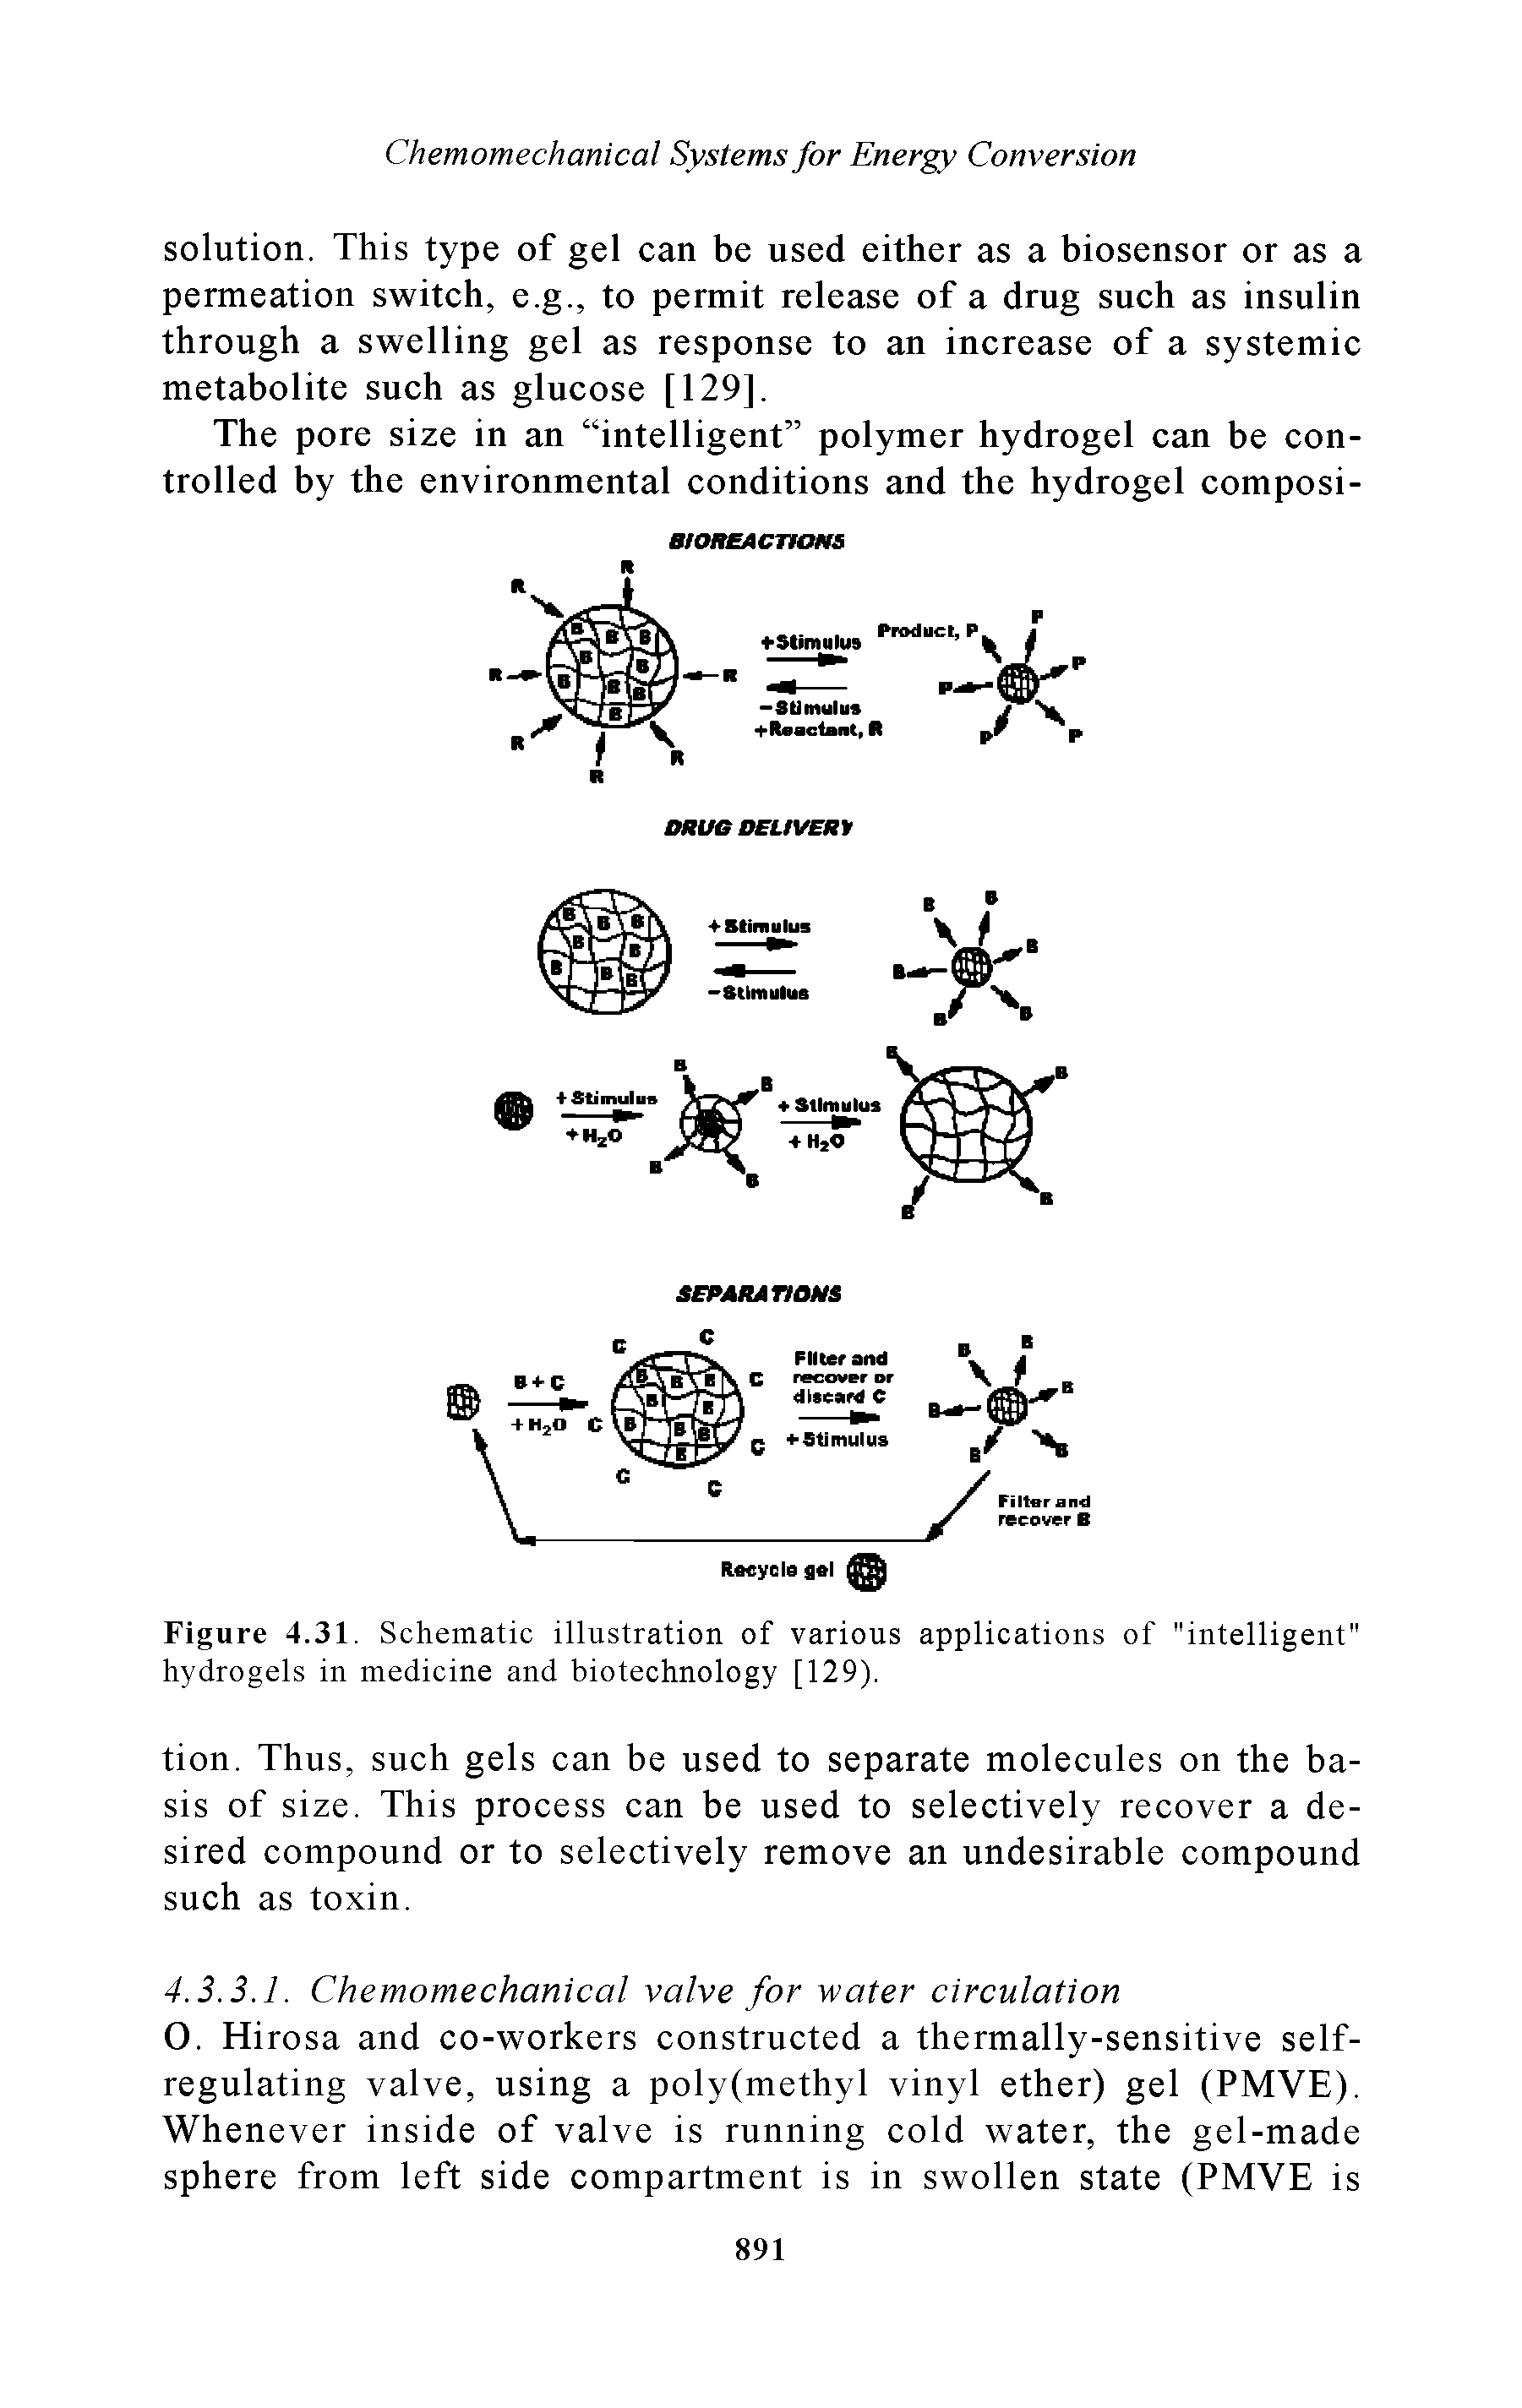 Figure 4.31. Schematic illustration of various applications of "intelligent" hydrogels in medicine and biotechnology [129).